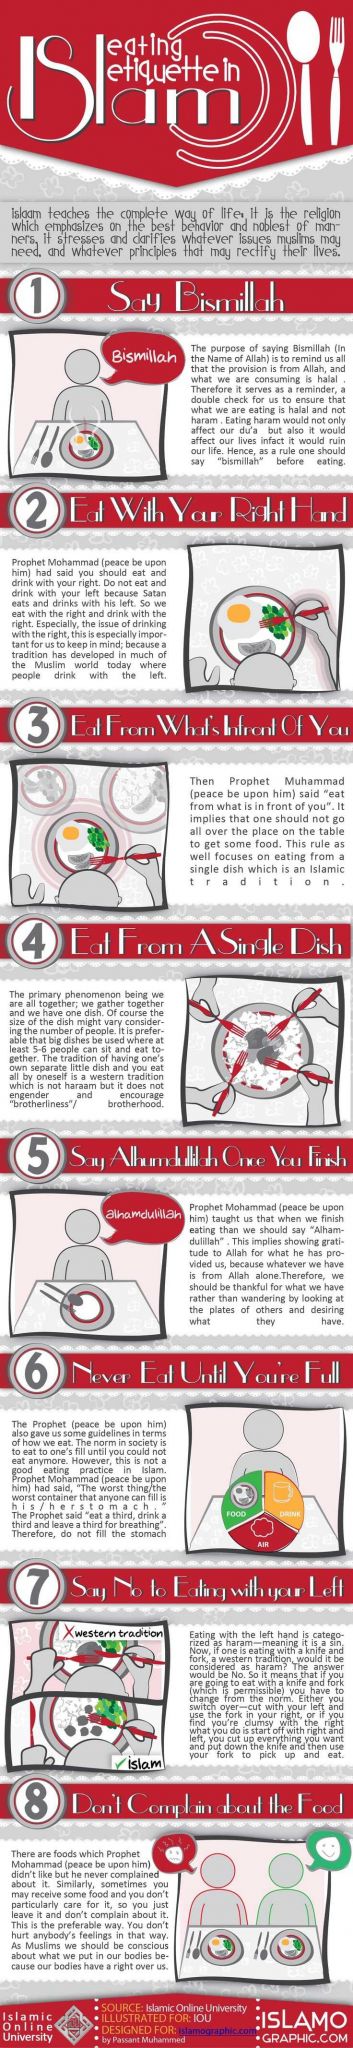 Rise Of islam Worksheet Along with 11 Best islamic topics Images On Pinterest